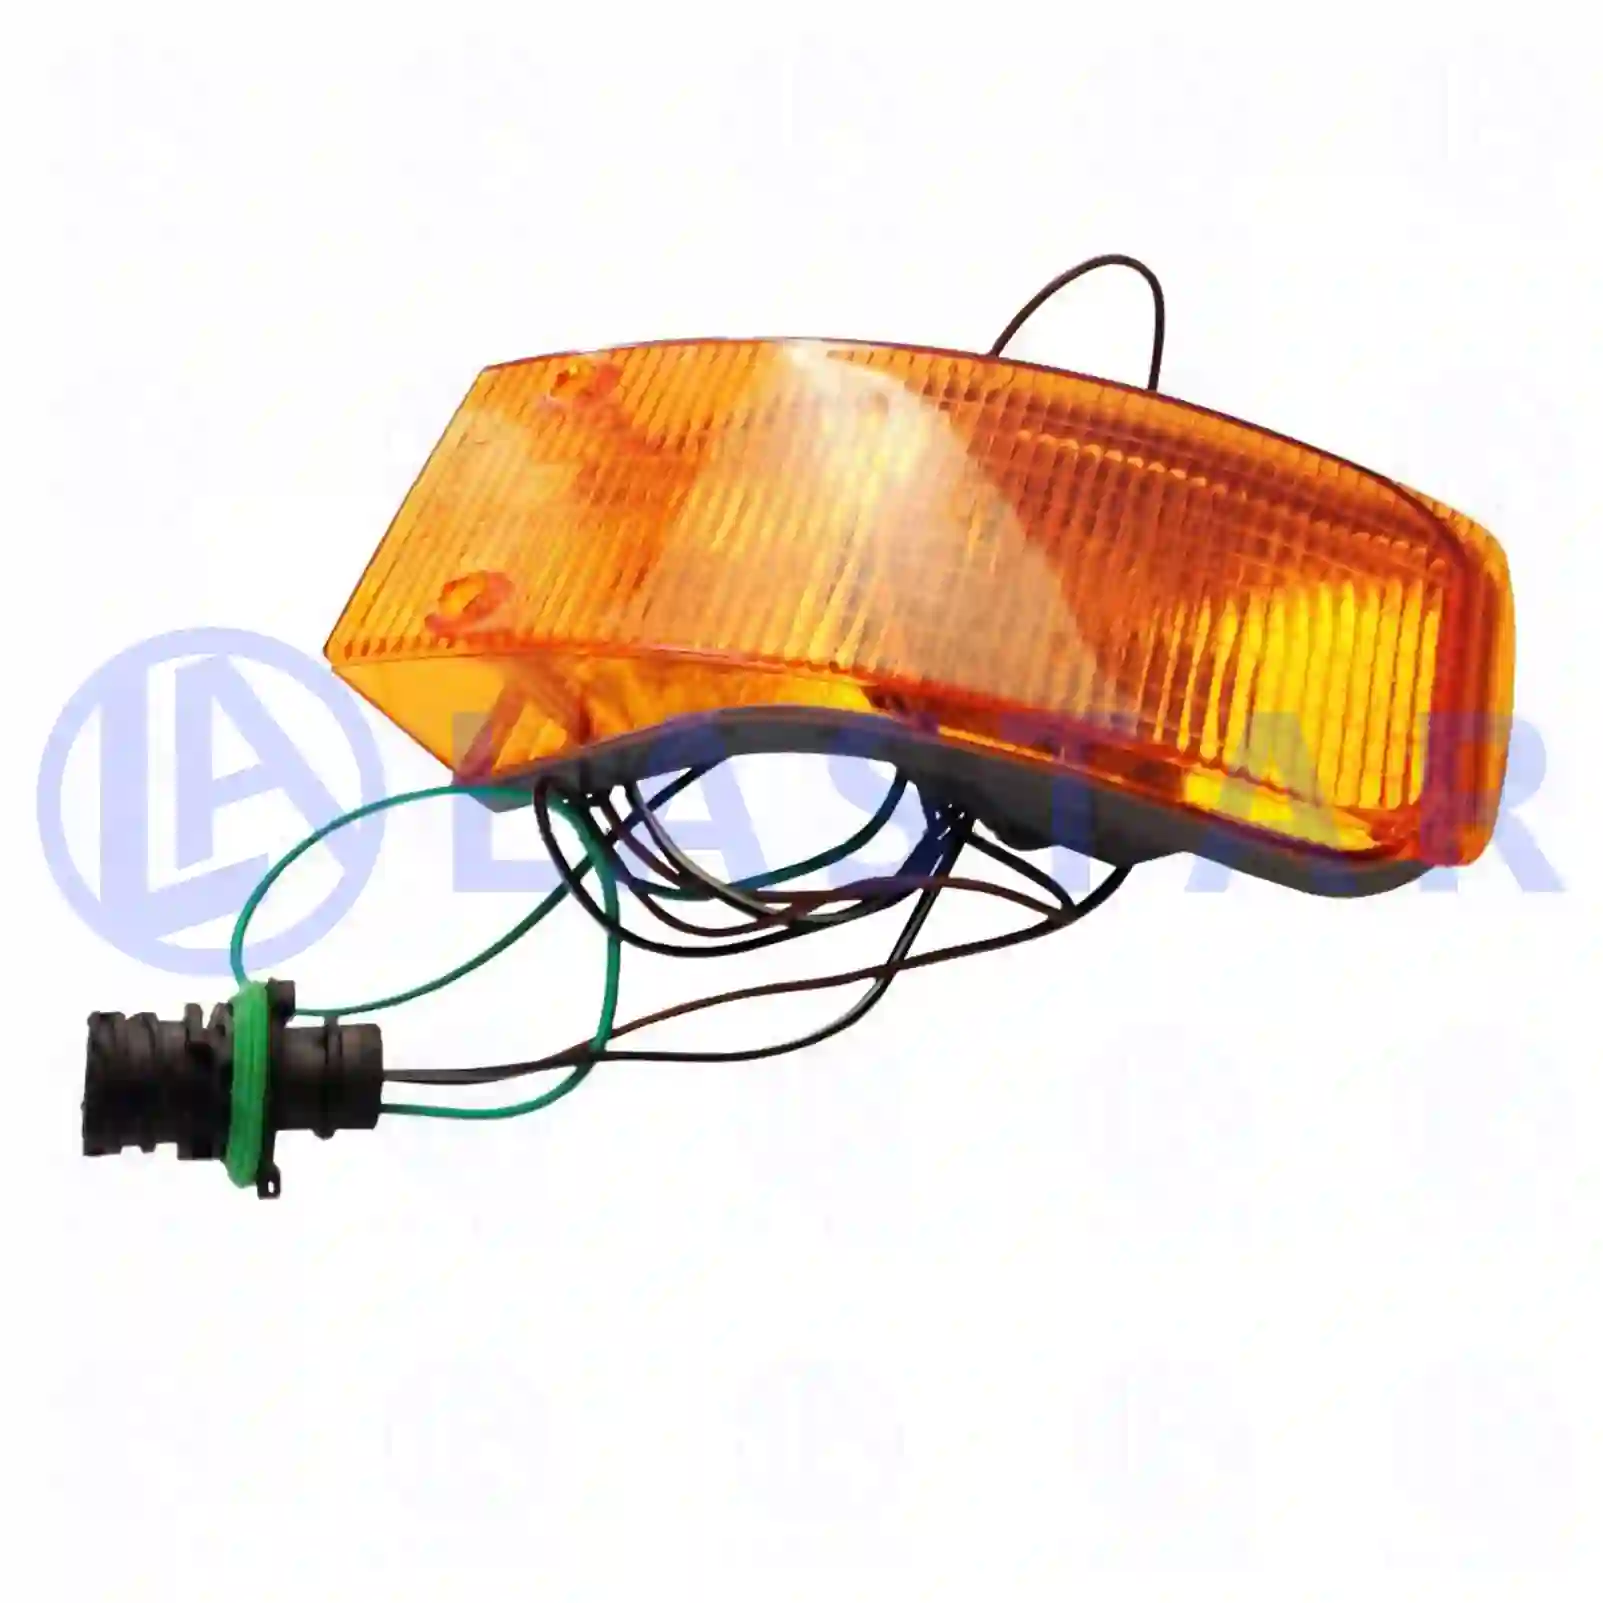 Turn signal lamp, without bulb, 77711824, 9418201321 ||  77711824 Lastar Spare Part | Truck Spare Parts, Auotomotive Spare Parts Turn signal lamp, without bulb, 77711824, 9418201321 ||  77711824 Lastar Spare Part | Truck Spare Parts, Auotomotive Spare Parts